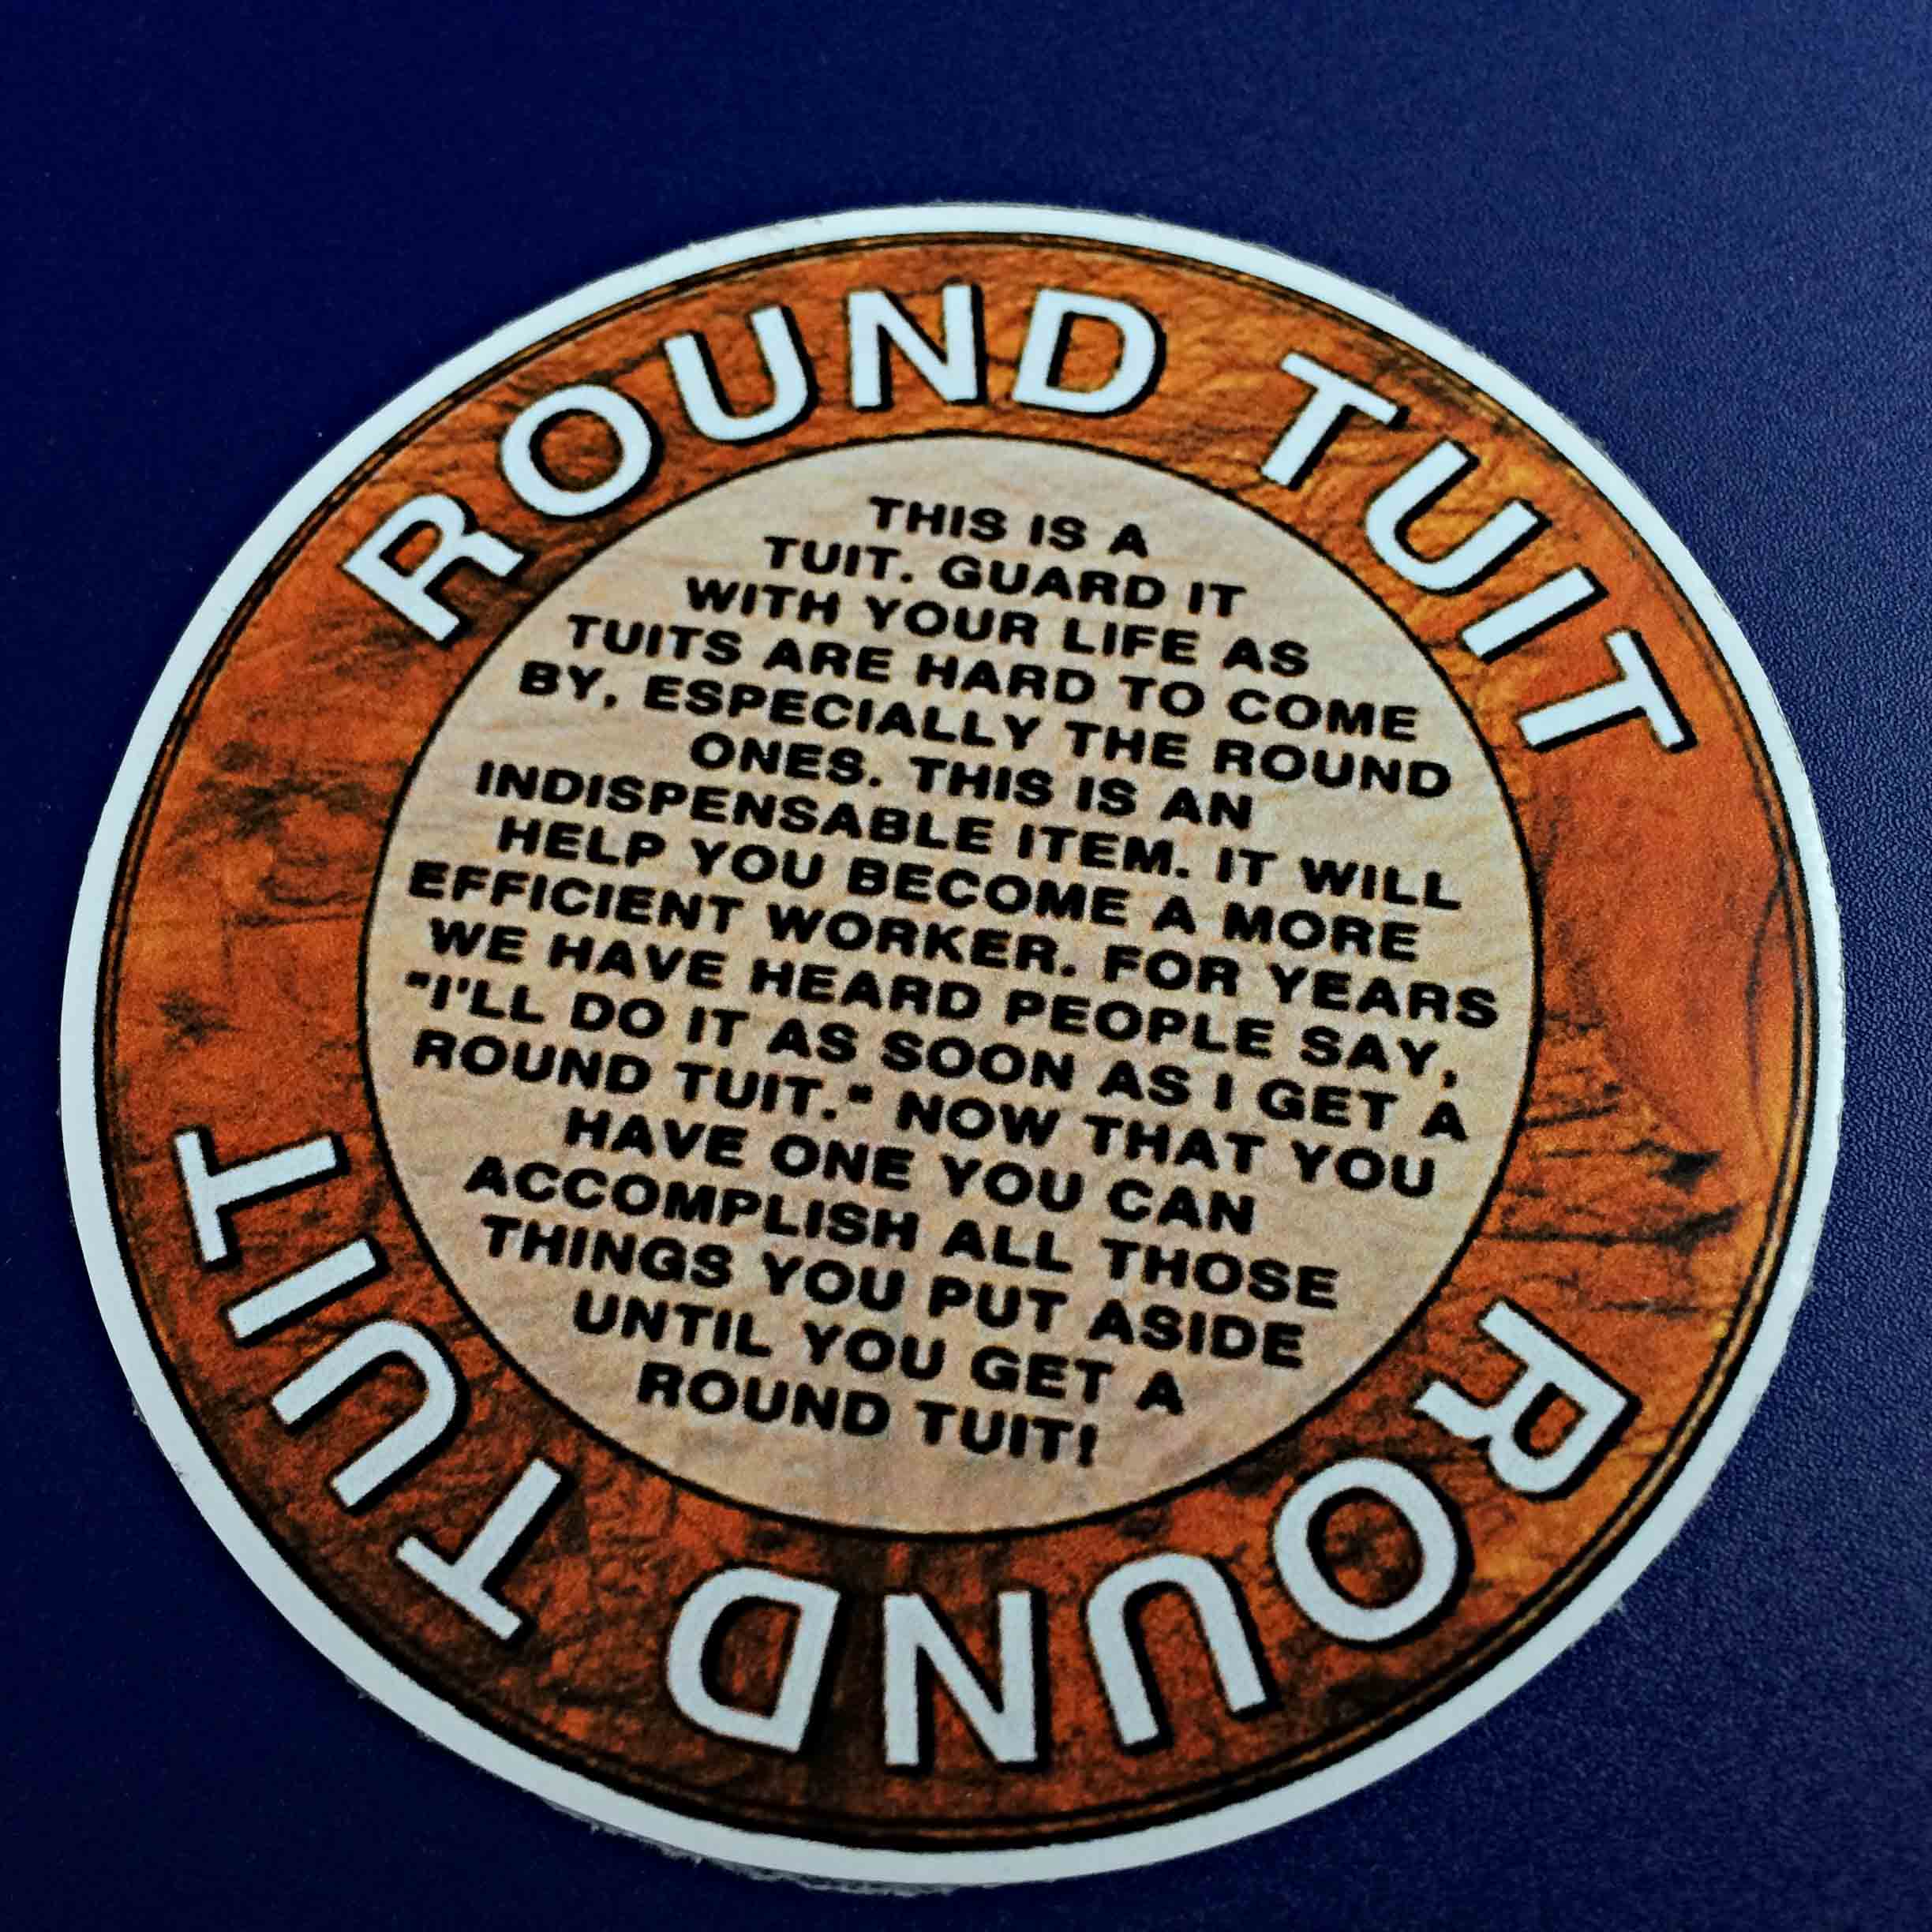 ROUND TUIT HUMOROUS STICKER. Round Tuit in white lettering on a brown outer circle. The inner circle contains the Round Tuit poem in black lettering.